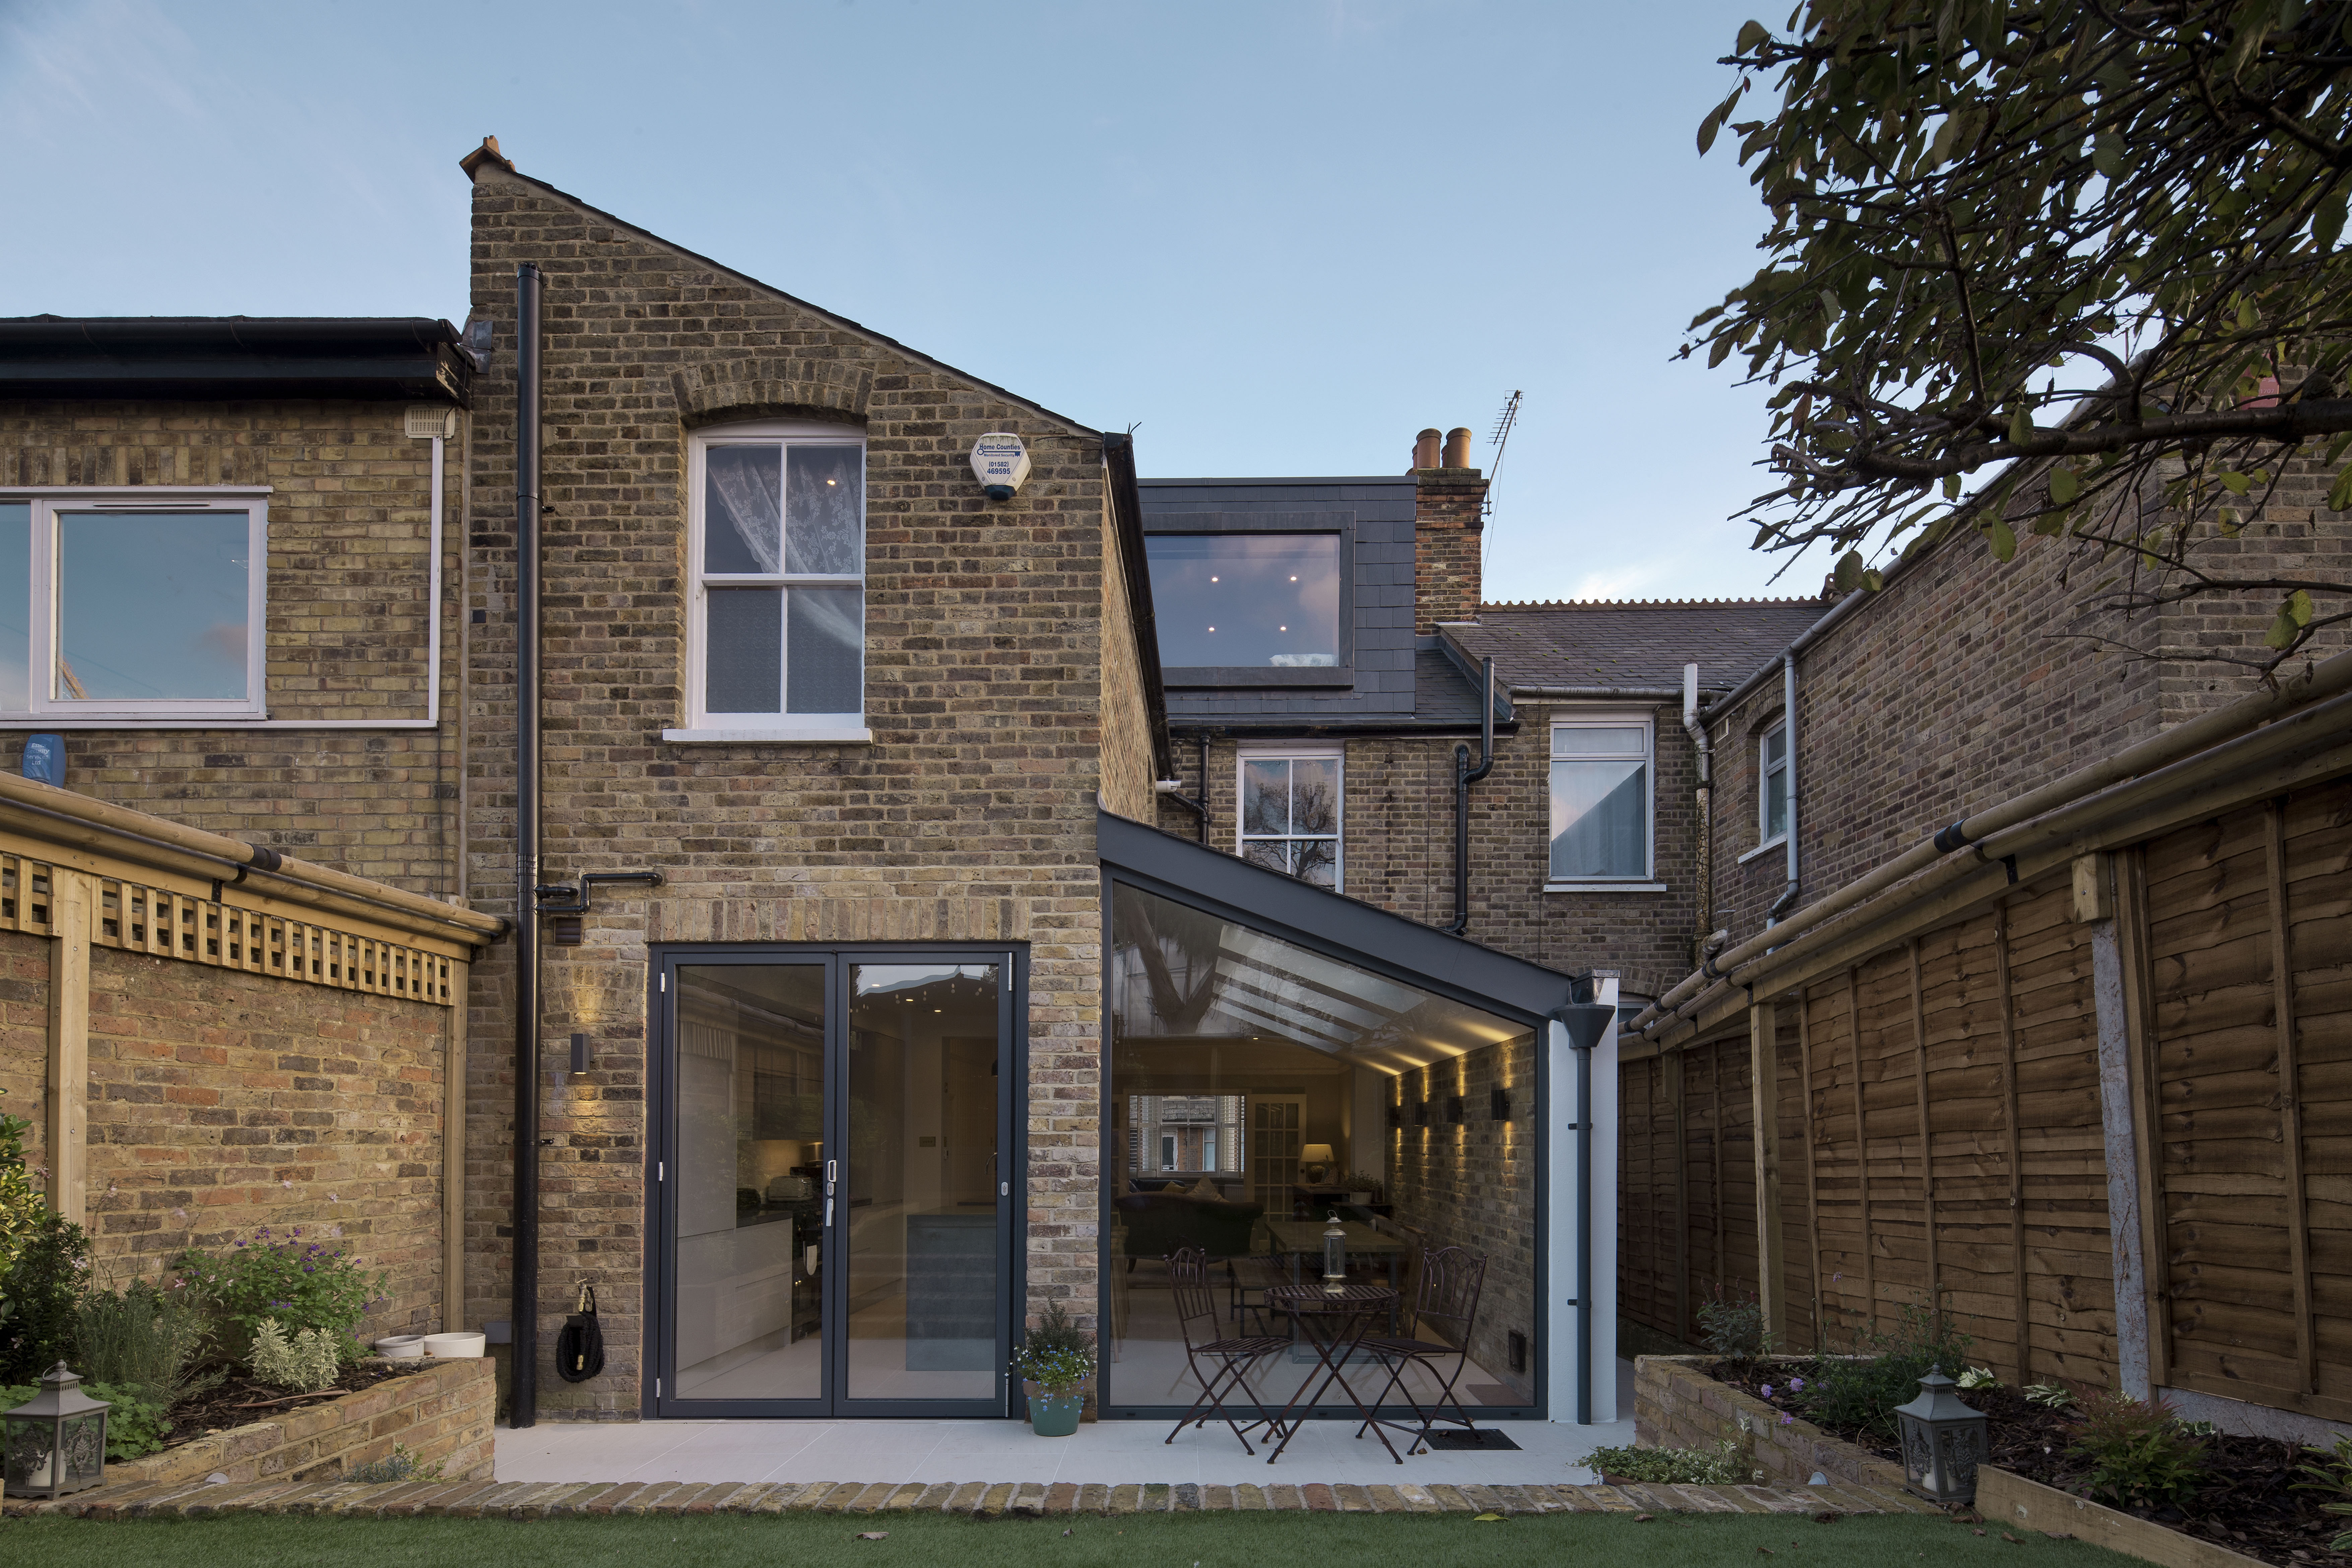 </p> <p>Find your ideal home design pro on designfor-me.com - get matched and see who's interested in your home project. Click image to see more inspiration from our design pros</p> <p>Design by Gareth, architect from Haringey, London</p> <p>#architecture #homedesign #modernhomes #homeinspiration #sideextensions #sidereturn #sideextensionideas #glazing #architecturalglazing #naturallight #bifolddoors #bifolds </p> <p>